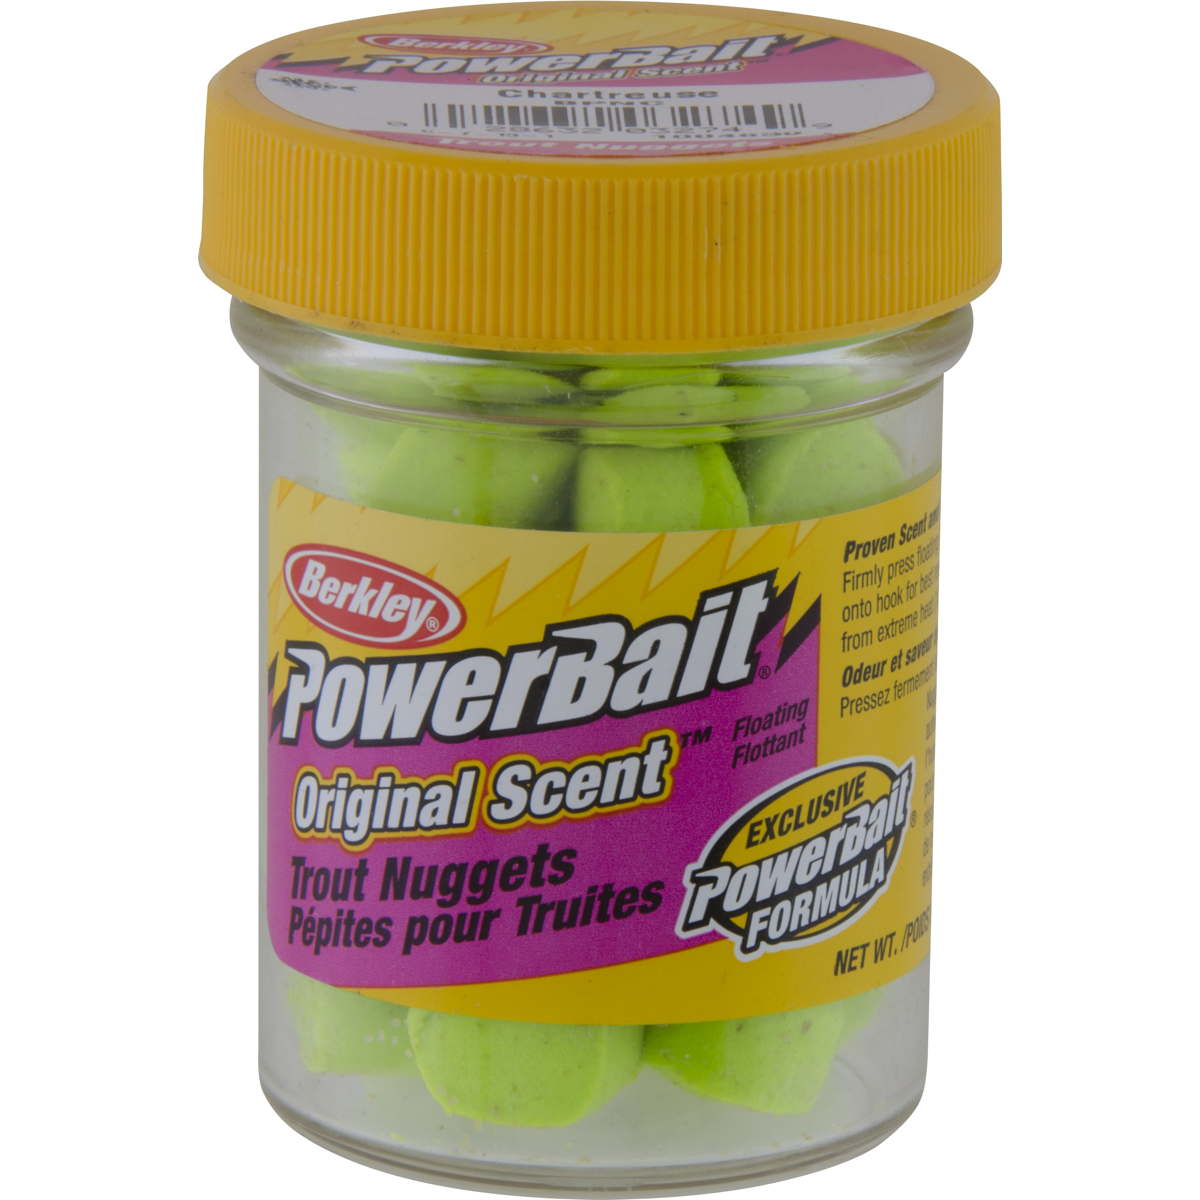 Photo of Berkley PowerBait Power Nuggets for sale at United Tackle Shops.